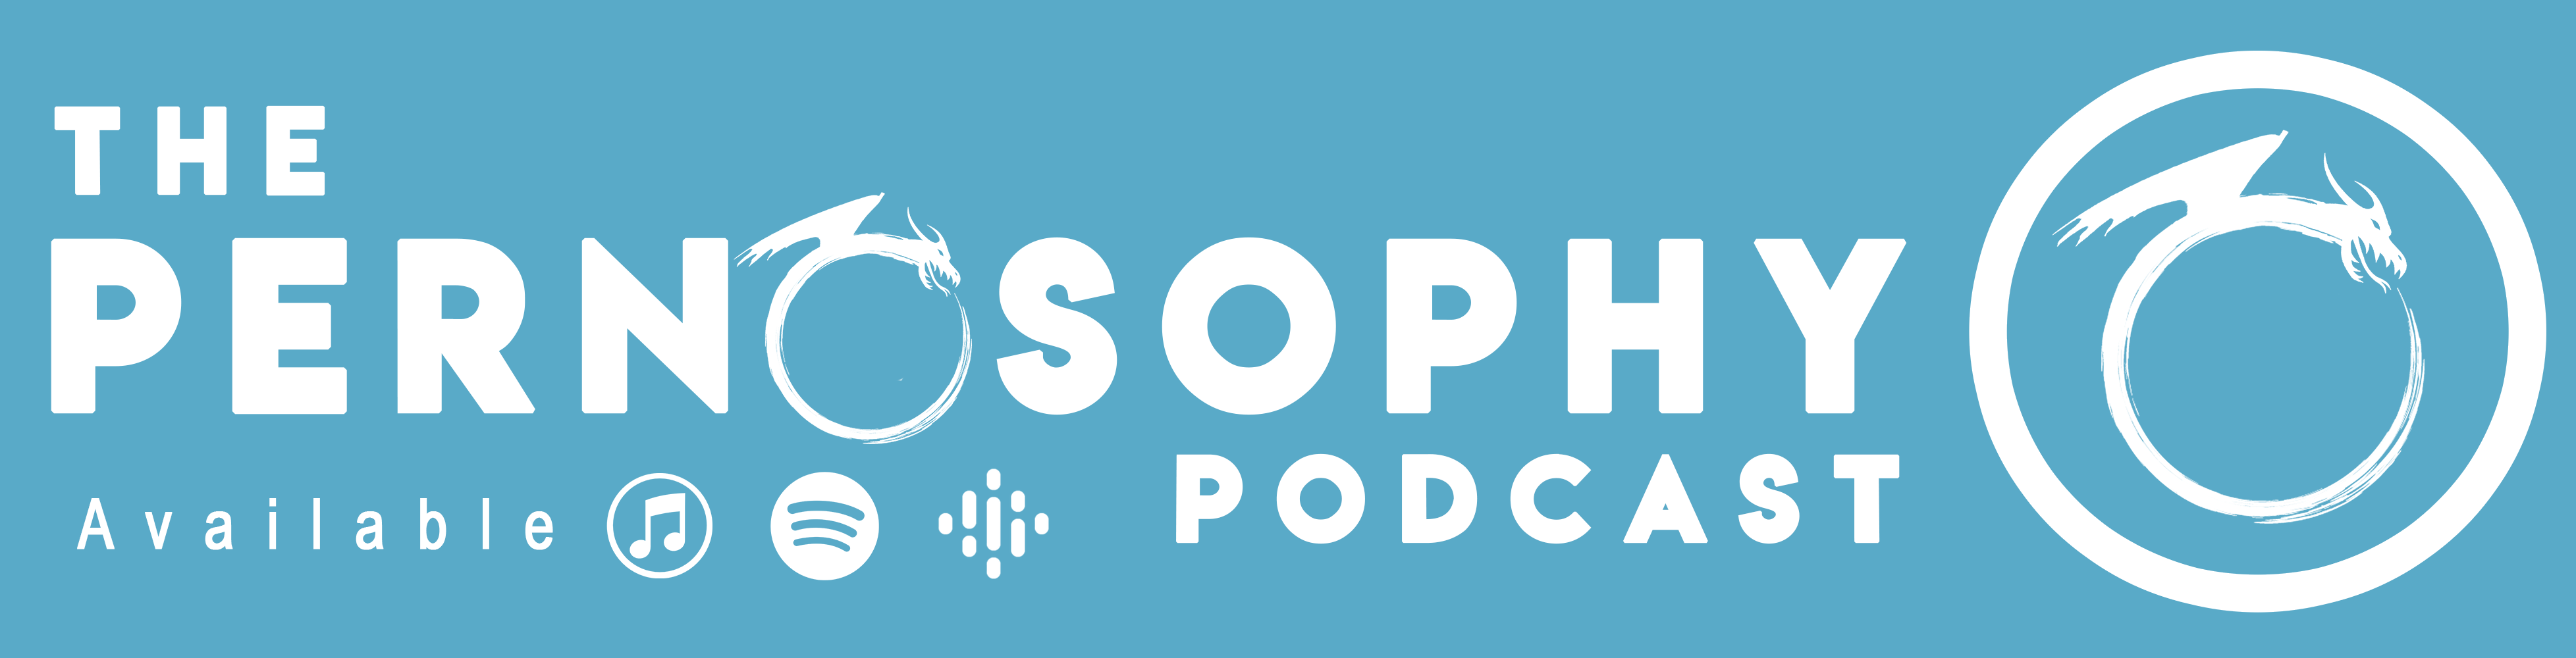 The Pernosophy Podcast